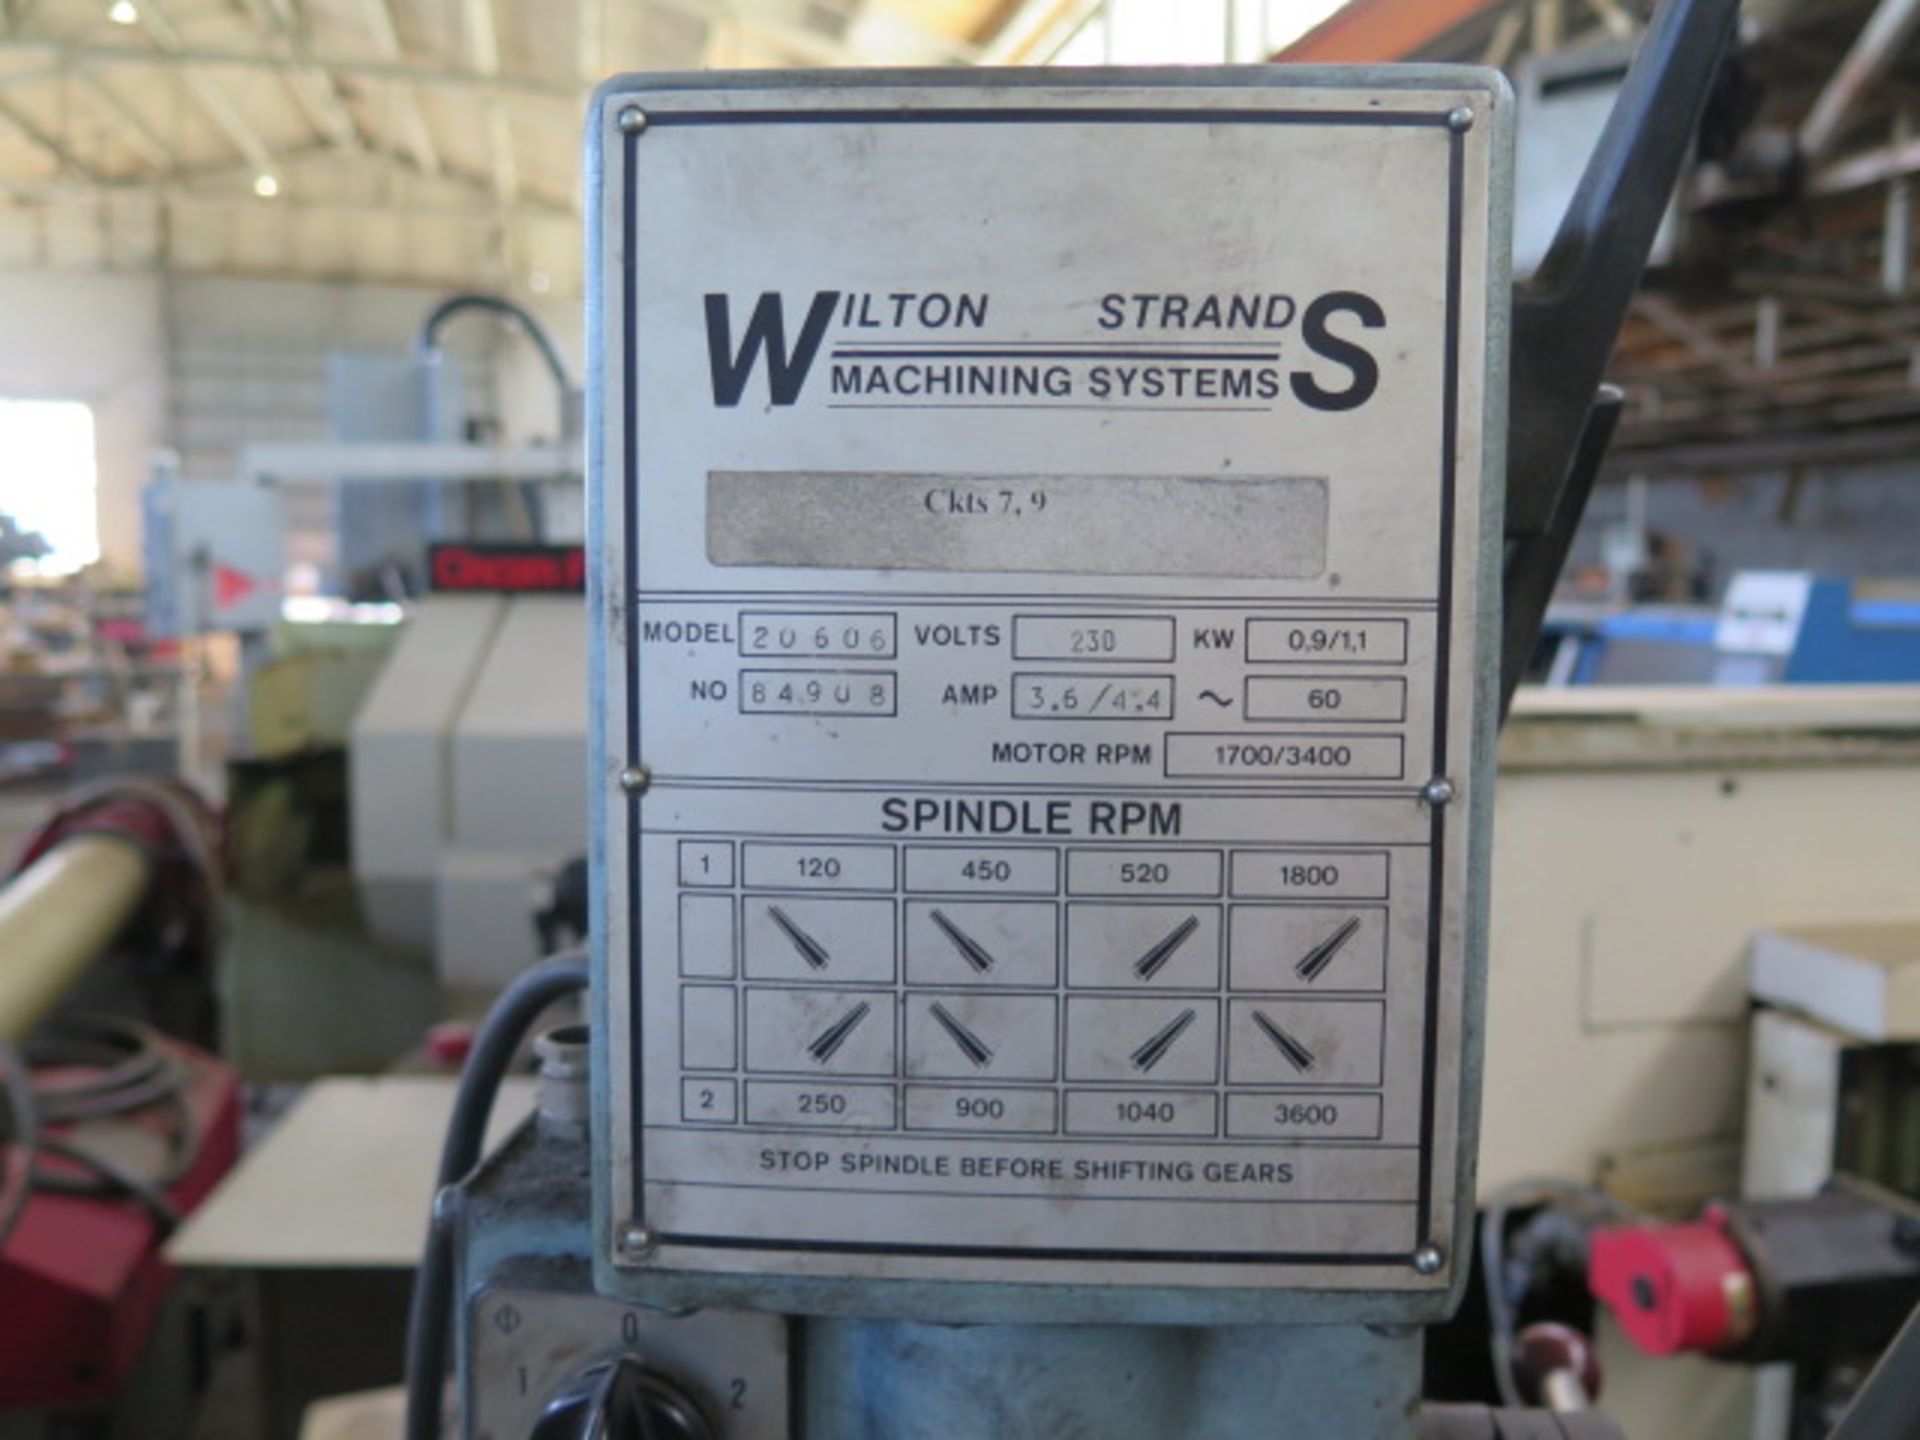 Wilton Strand 20606 Geared Head Drill Press s/n 84908 w/ 120-3000 RPM, 18" x 25" Table, SOLD AS IS - Image 6 of 6